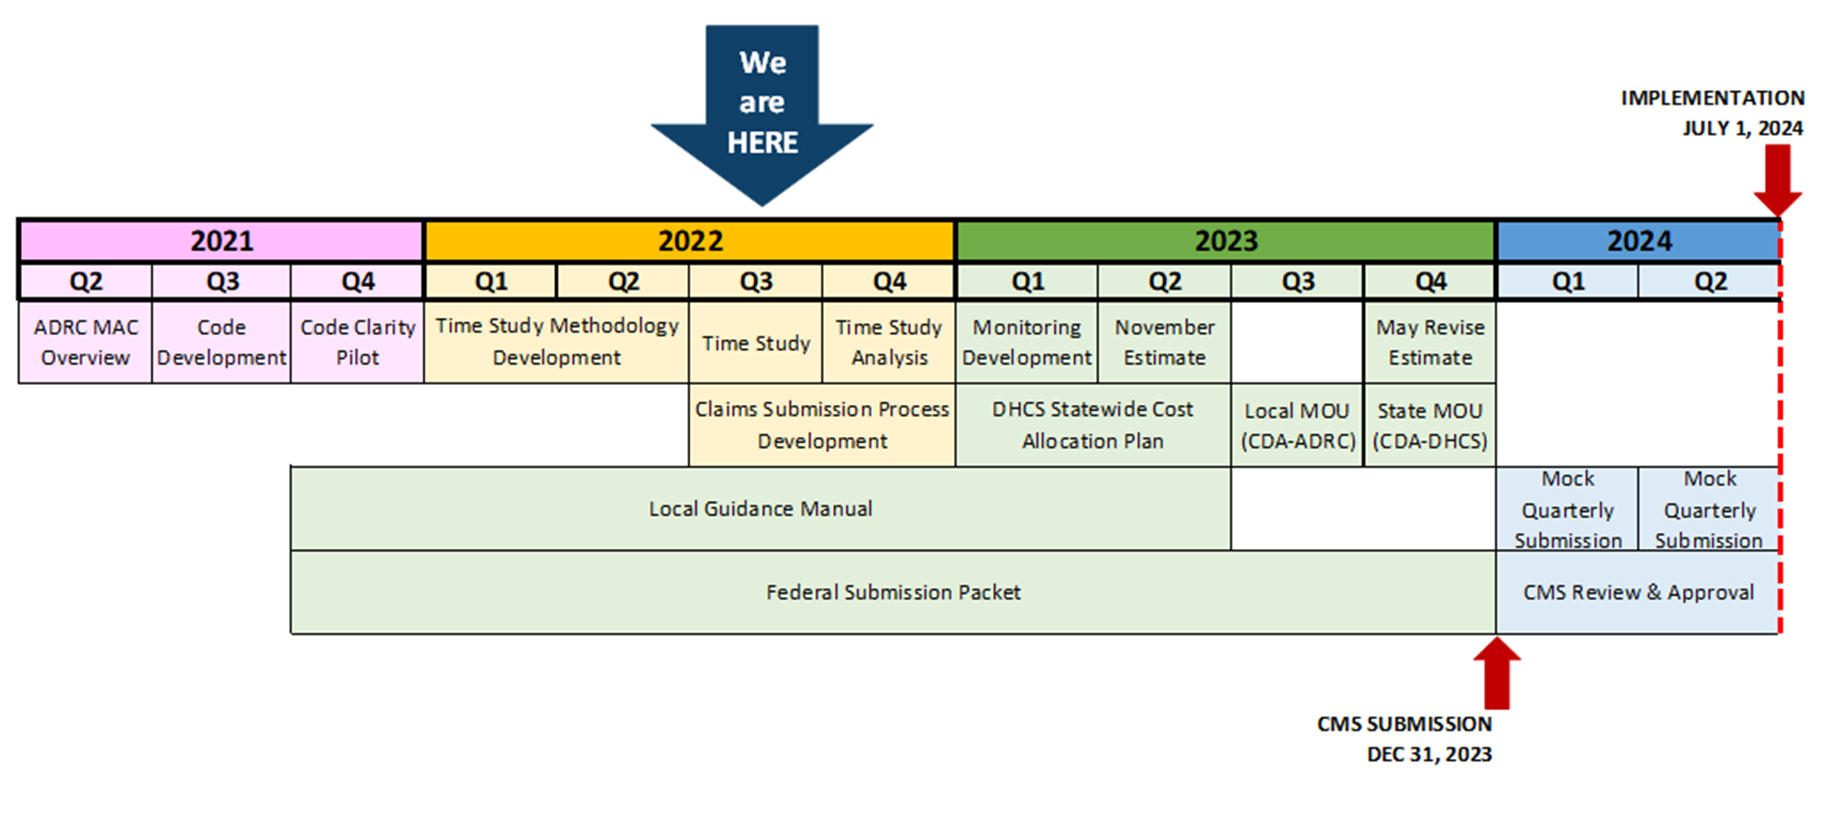 This image represents a timeline which outlines the major tasks that need to be completed in order to meet the July 1, 2024 implementation date for Medicaid Administrative Claiming. In calendar year 2021, an ADRC Medicaid Administrative Claiming overview training took place in quarter 2, codes were developed in quarter 3, and a code clarity pilot took place in quarter 4. For calendar year 2022, the time study methodology was developed in quarters 1 and 2, the time study will take place in quarter 3, and the time study analysis will be conducted in quarter 4. The claims submission process will also be developed in quarters 3 and 4. In calendar year 2023, monitoring processes will be developed in quarter 1, the November estimate will be completed in quarter 2, and the May revision estimate will be completed in quarter 4. Also, the DHCS statewide cost allocation plan will be updated in quarters 1 and 2, the local MOU between CDA and ADRC partners will be drafted in quarter 3, and the state MOU between CDA and DHCS will be drafted in quarter 4. The local guidance manual and federal submission packets will be developed simultaneously throughout calendar years 2021, 2022, and 2023. The federal packet to CMS will be submitted by December 31, 2023 to allow 6 months for review and approval prior to full implementation by July 1, 2024. During calendar year 2024, while awaiting review and approval by CMS, mock quarterly submissions will be conducted during quarters 1 and 2.